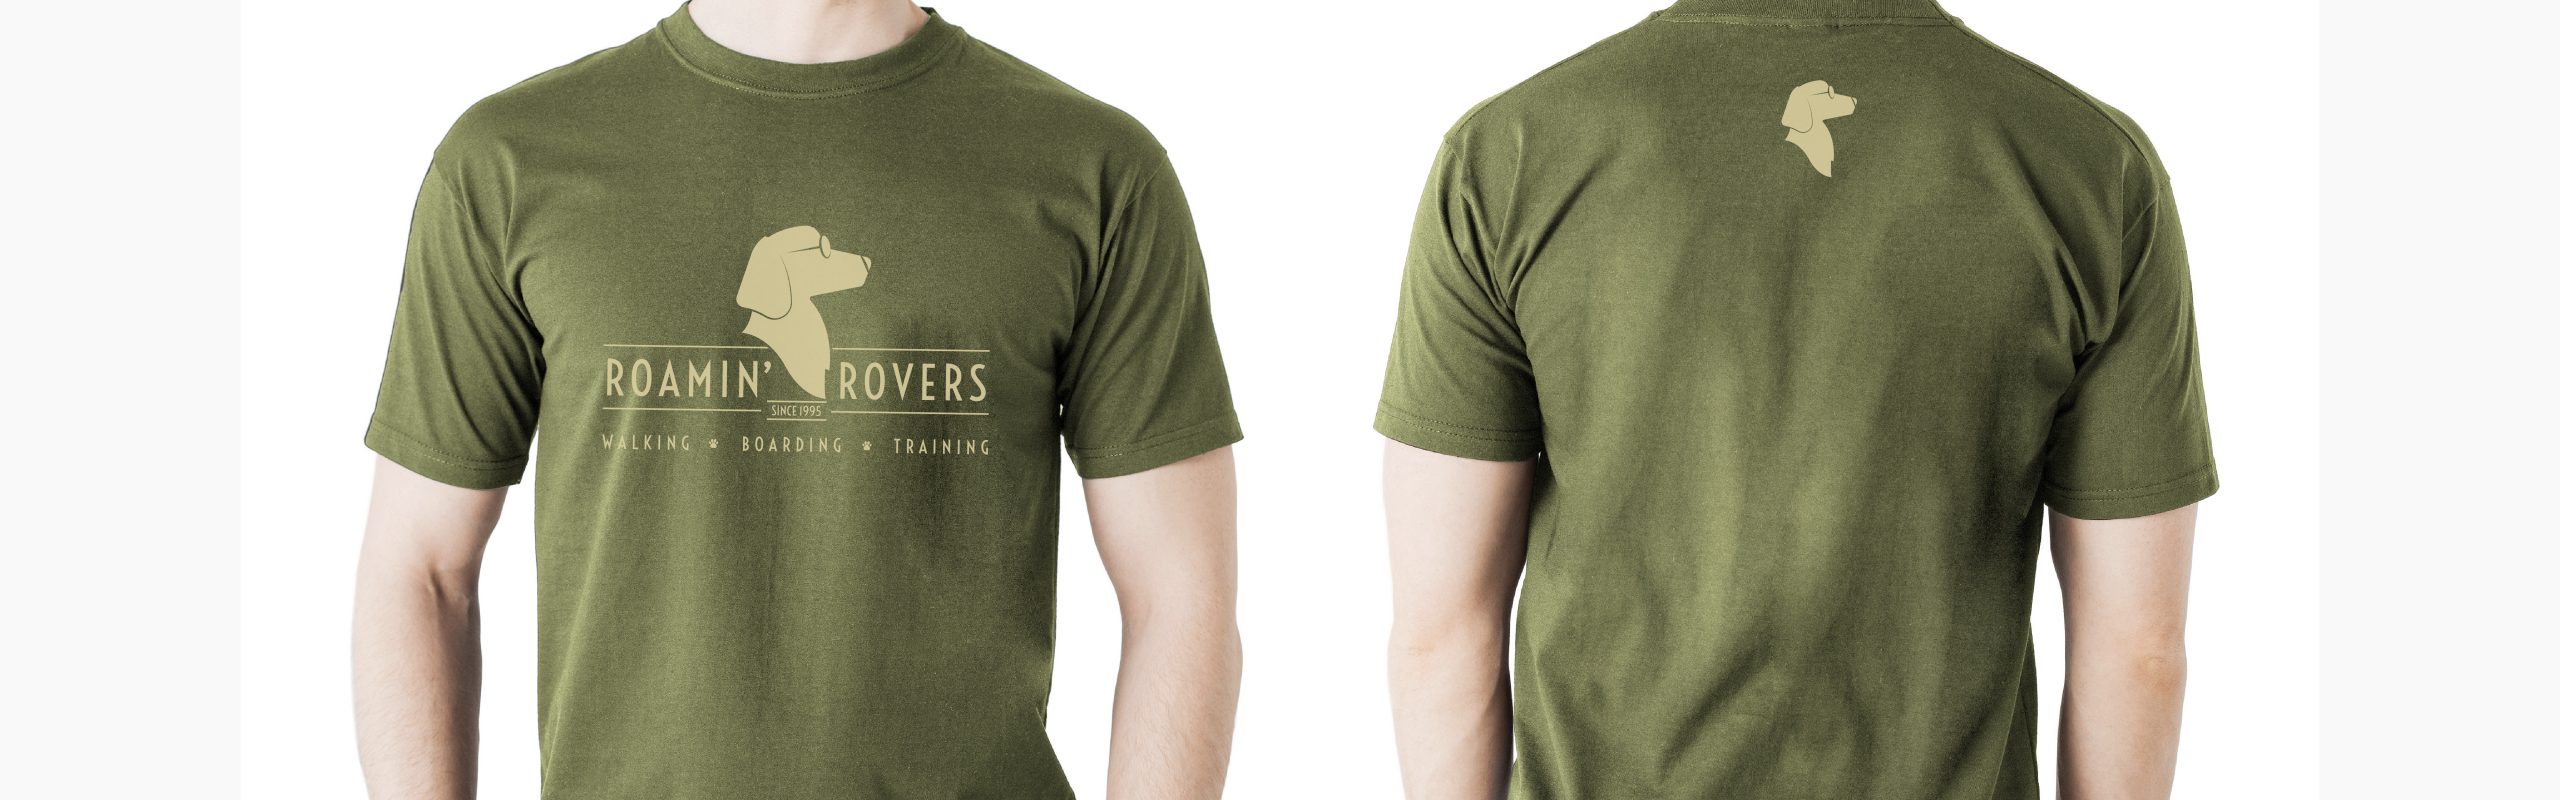 Front and back view of a person wearing a green t-shirt with a graphic of a dog silhouette and the text "Roamin' Rovers - walking - boarding - training," and a small paw.